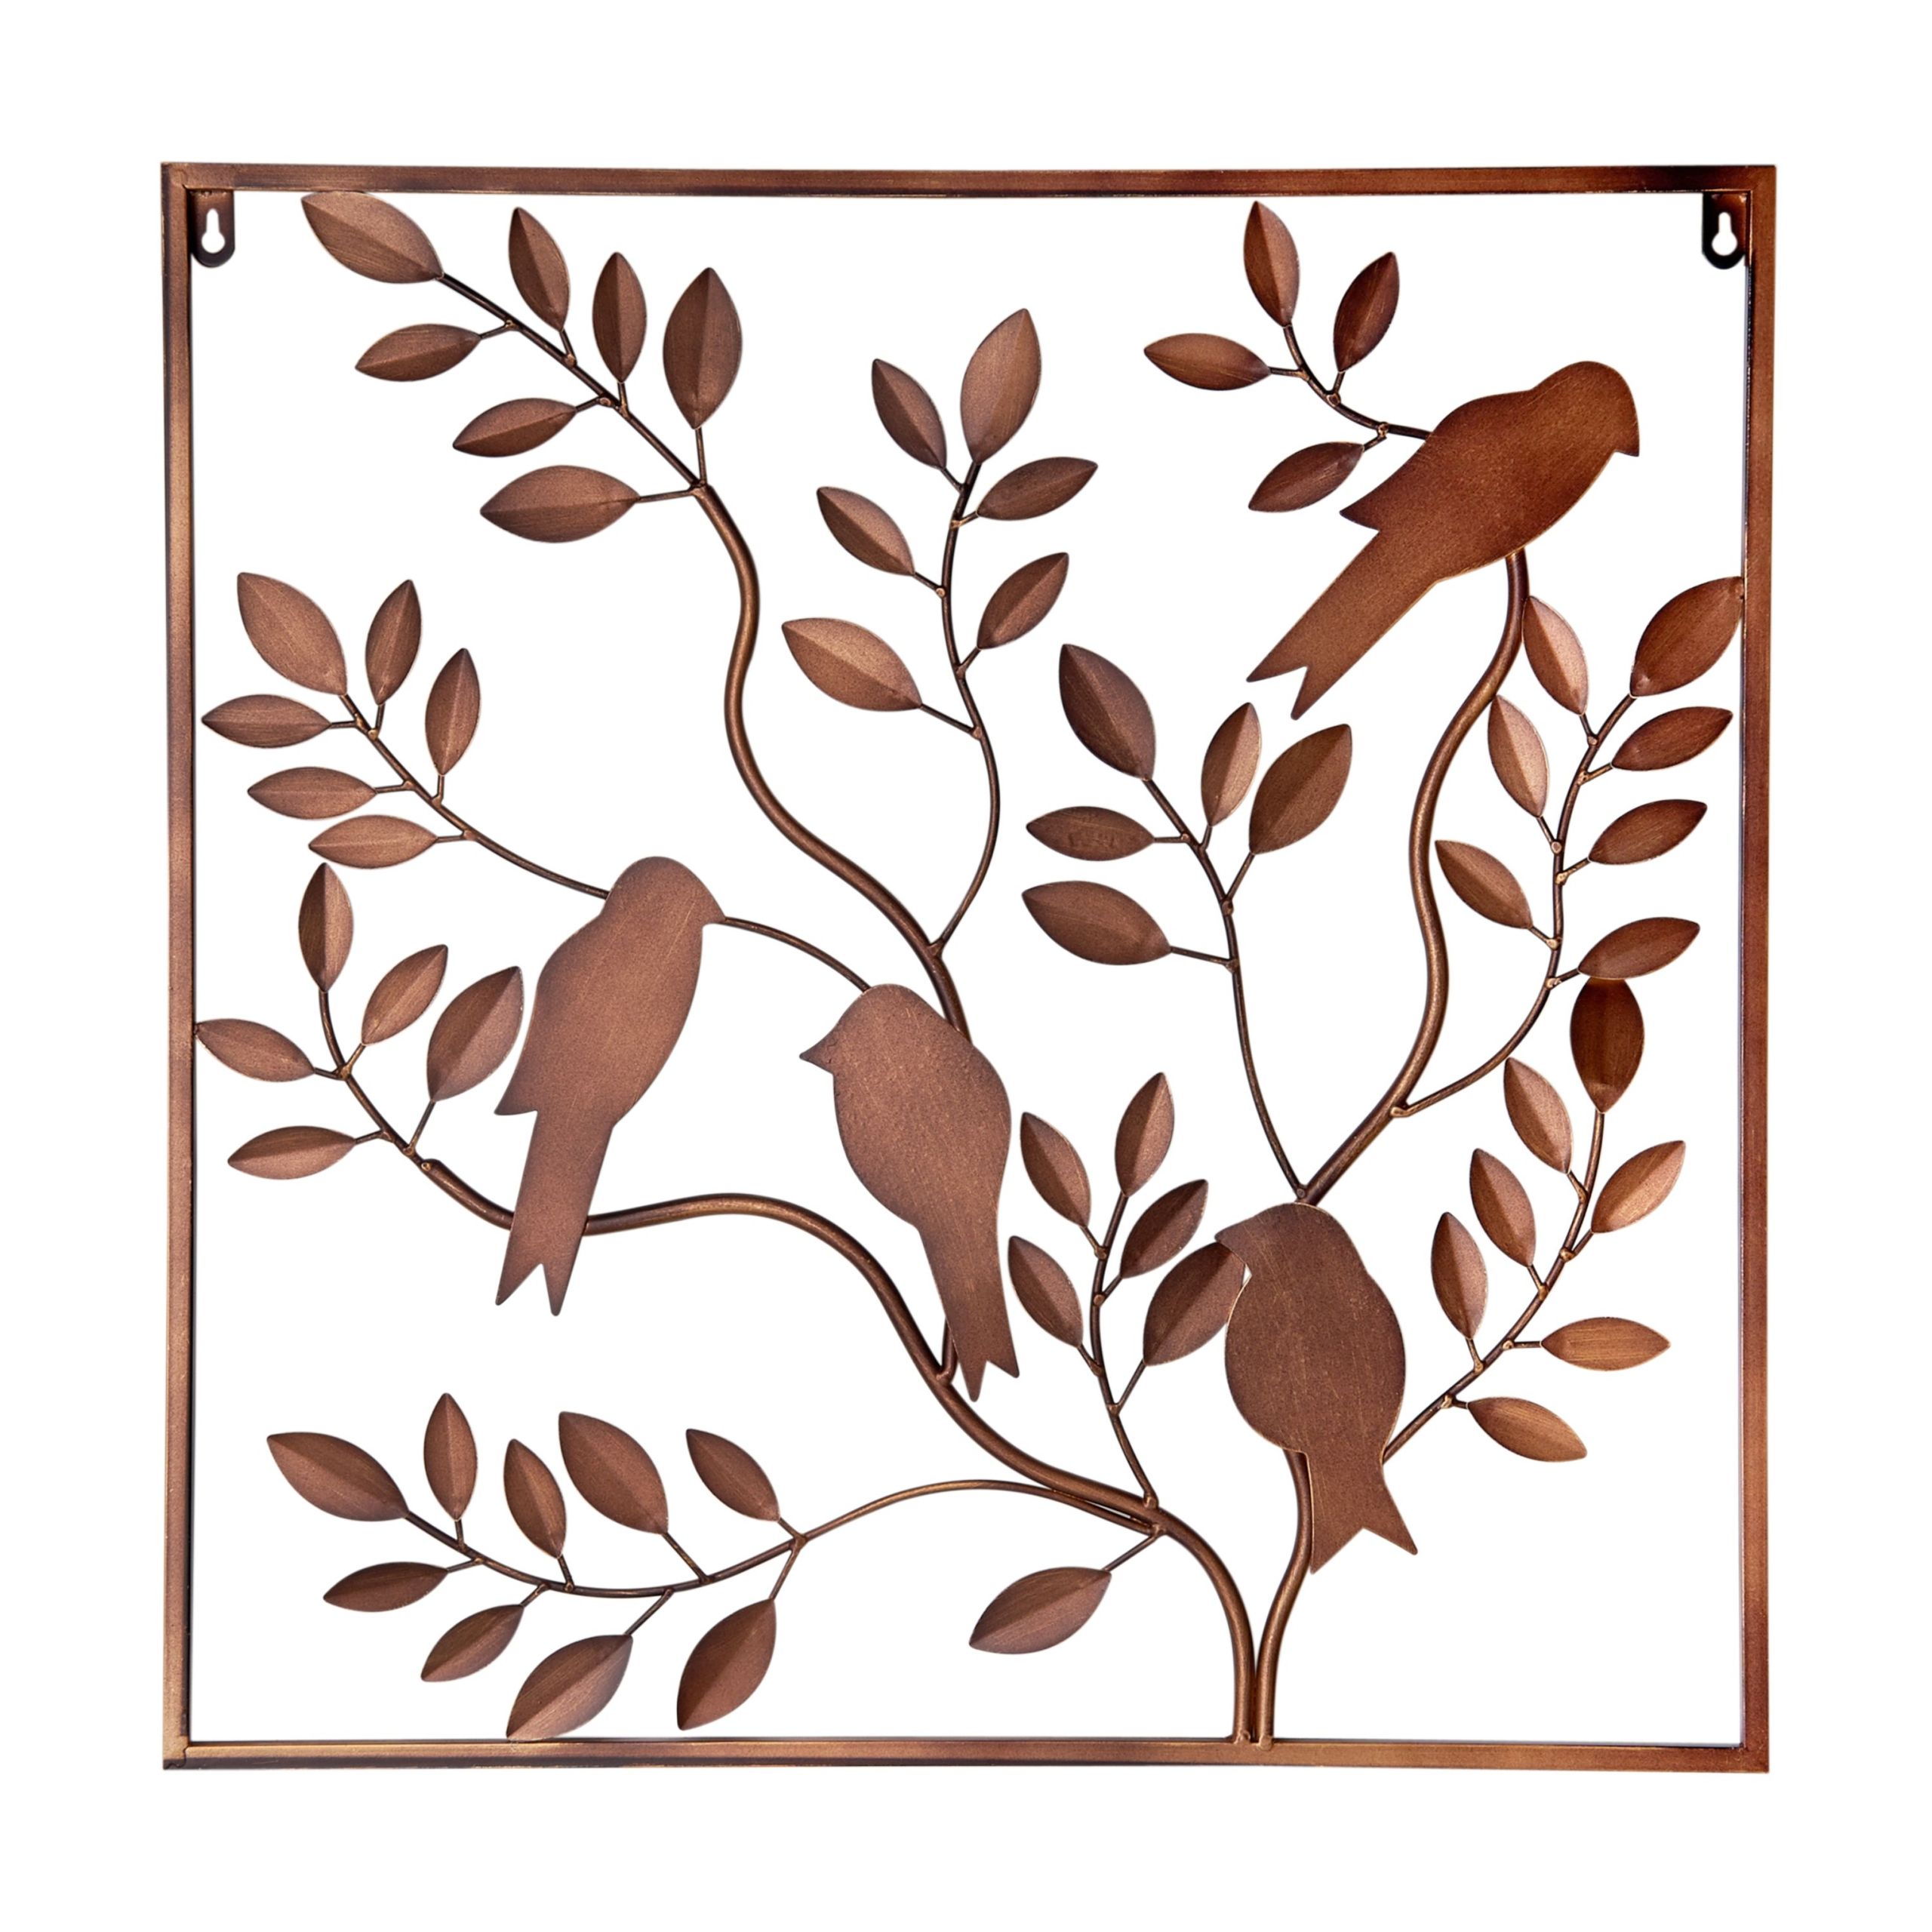 Metal Bird Wall Decor You'll Love In 2021 – Visualhunt Within Bird Metal Wall Art (View 7 of 15)